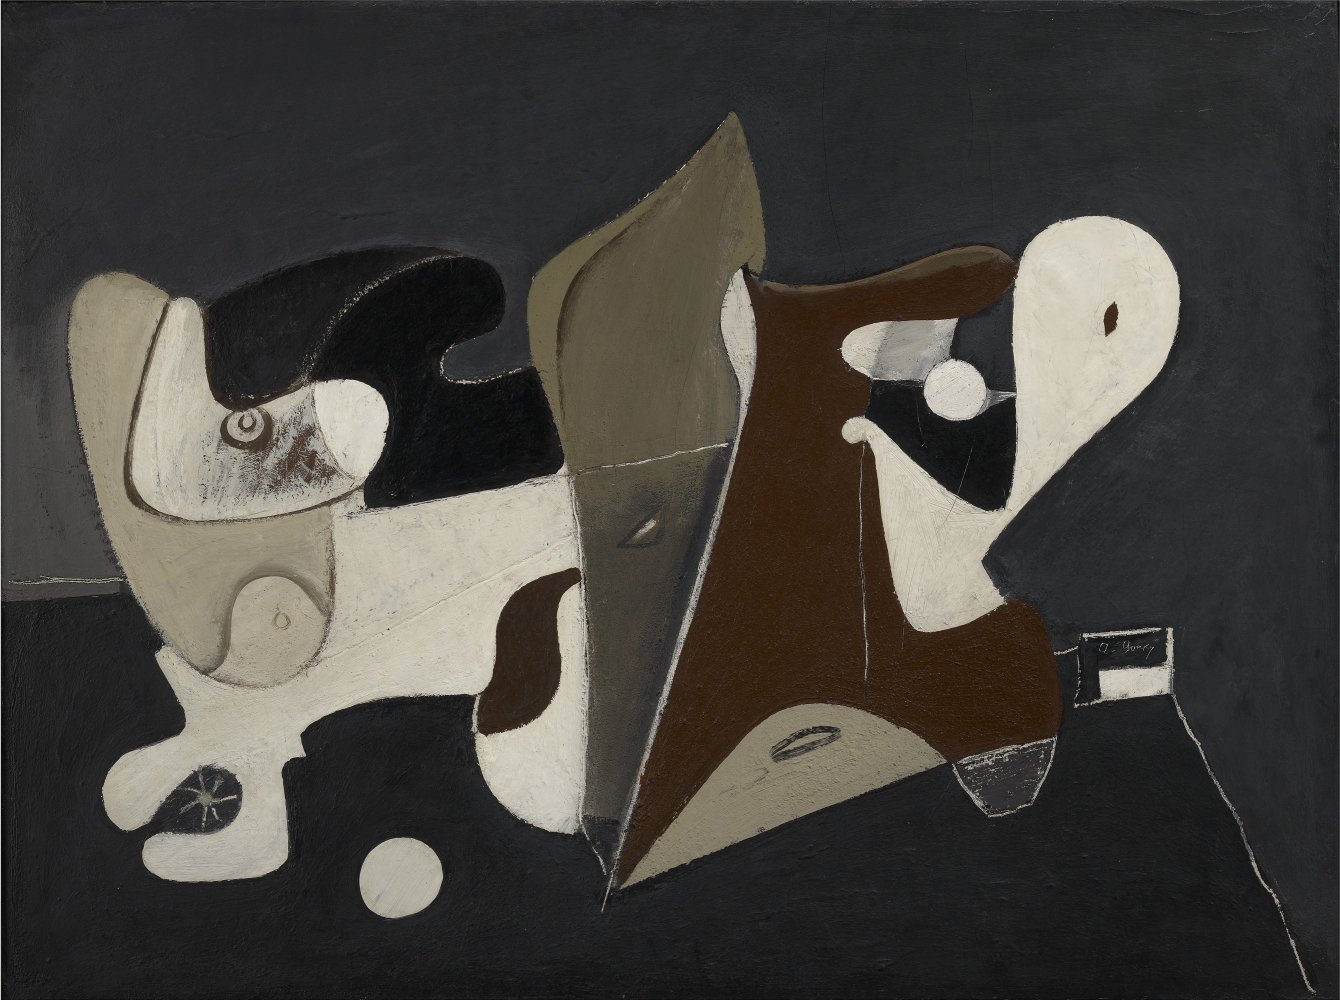 Enigma, c. 1933&ndash;34, oil on canvas, 36 x 47 7/8 in. (91.4 x 121.6 cm). The Museum of Fine Arts, Houston, Museum purchase funded by the Caroline Wiess Law Accessions Endowment Fund, 2005.1157.&nbsp;[AGCR: P120]